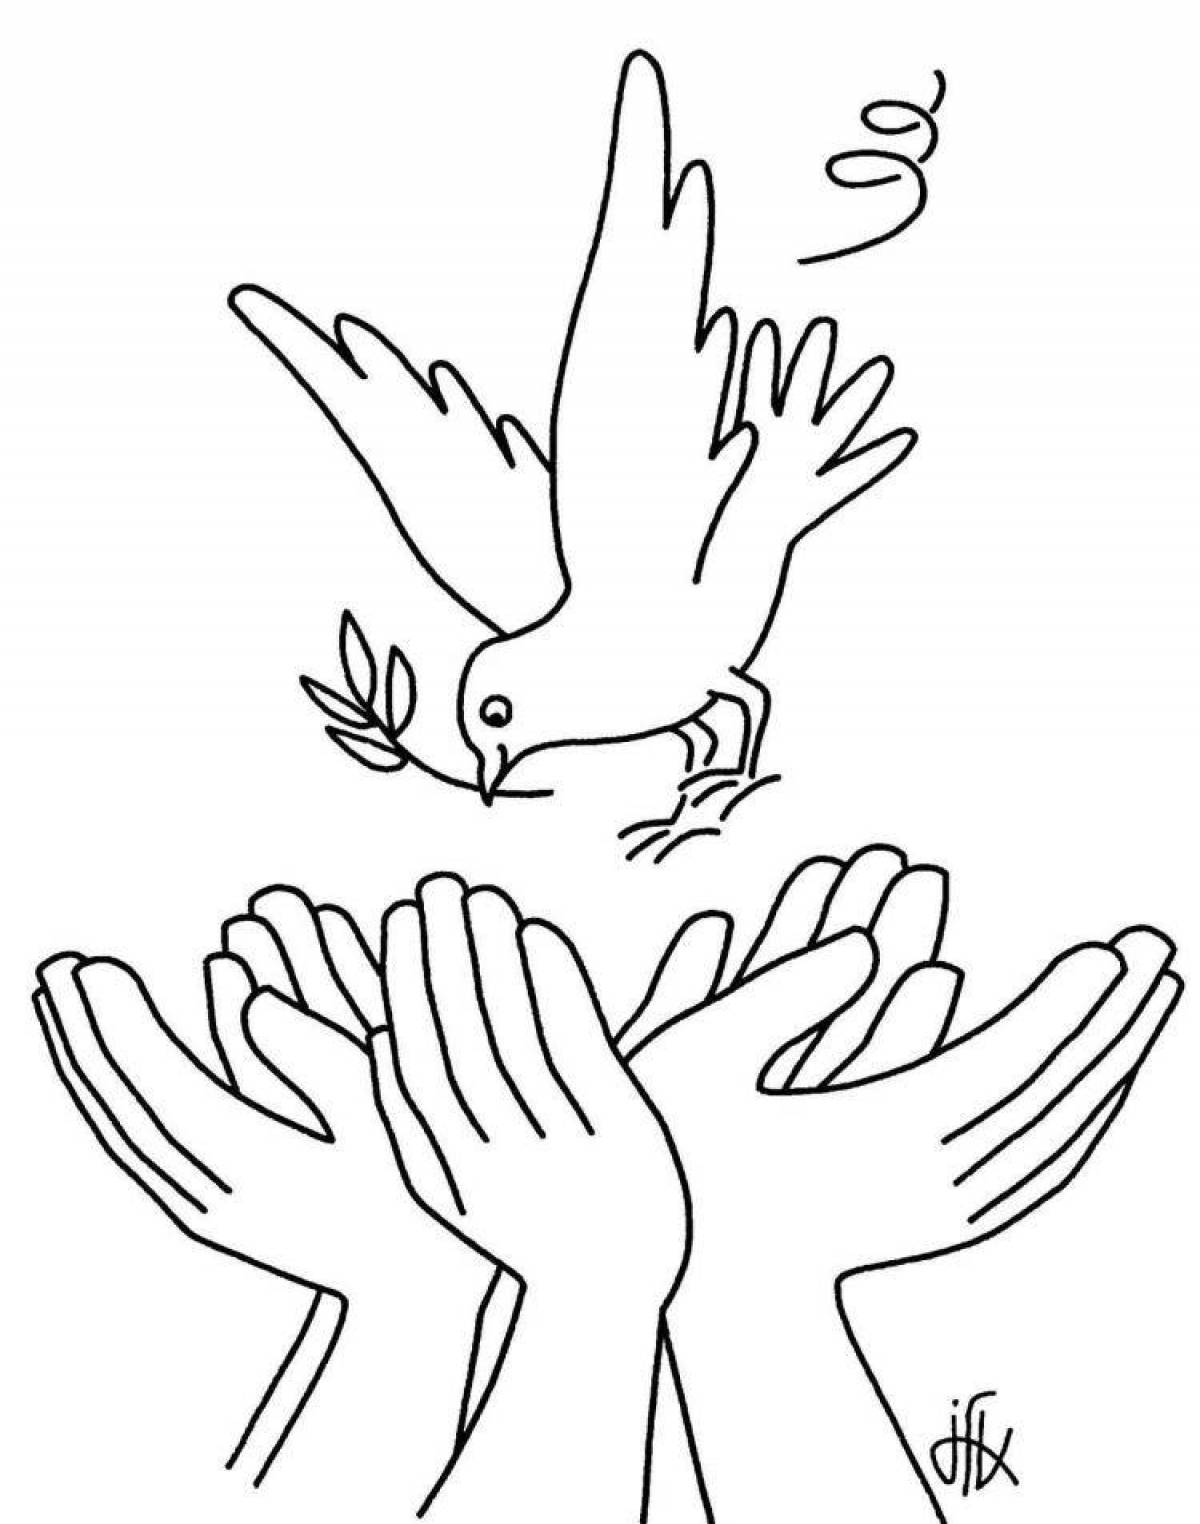 Bright coloring page of world peace without war